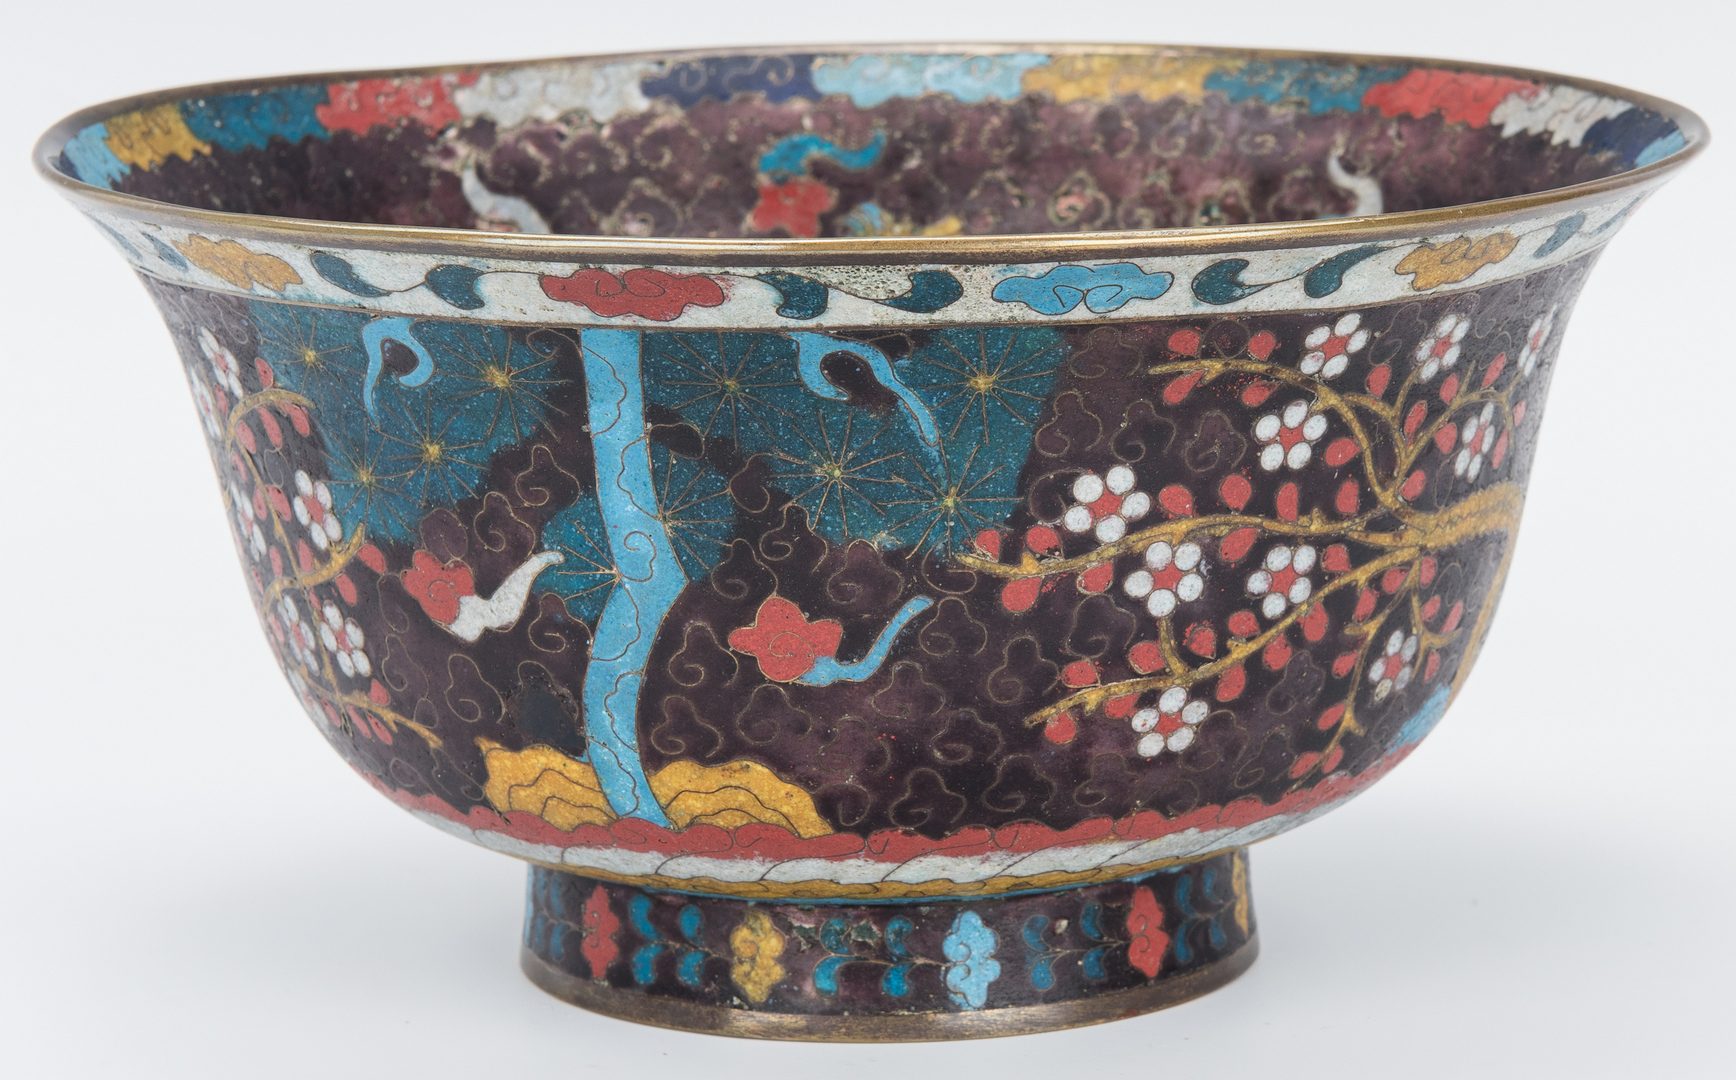 Lot 2: Cloisonne bowl with Horses, Urn, Box, 3 items